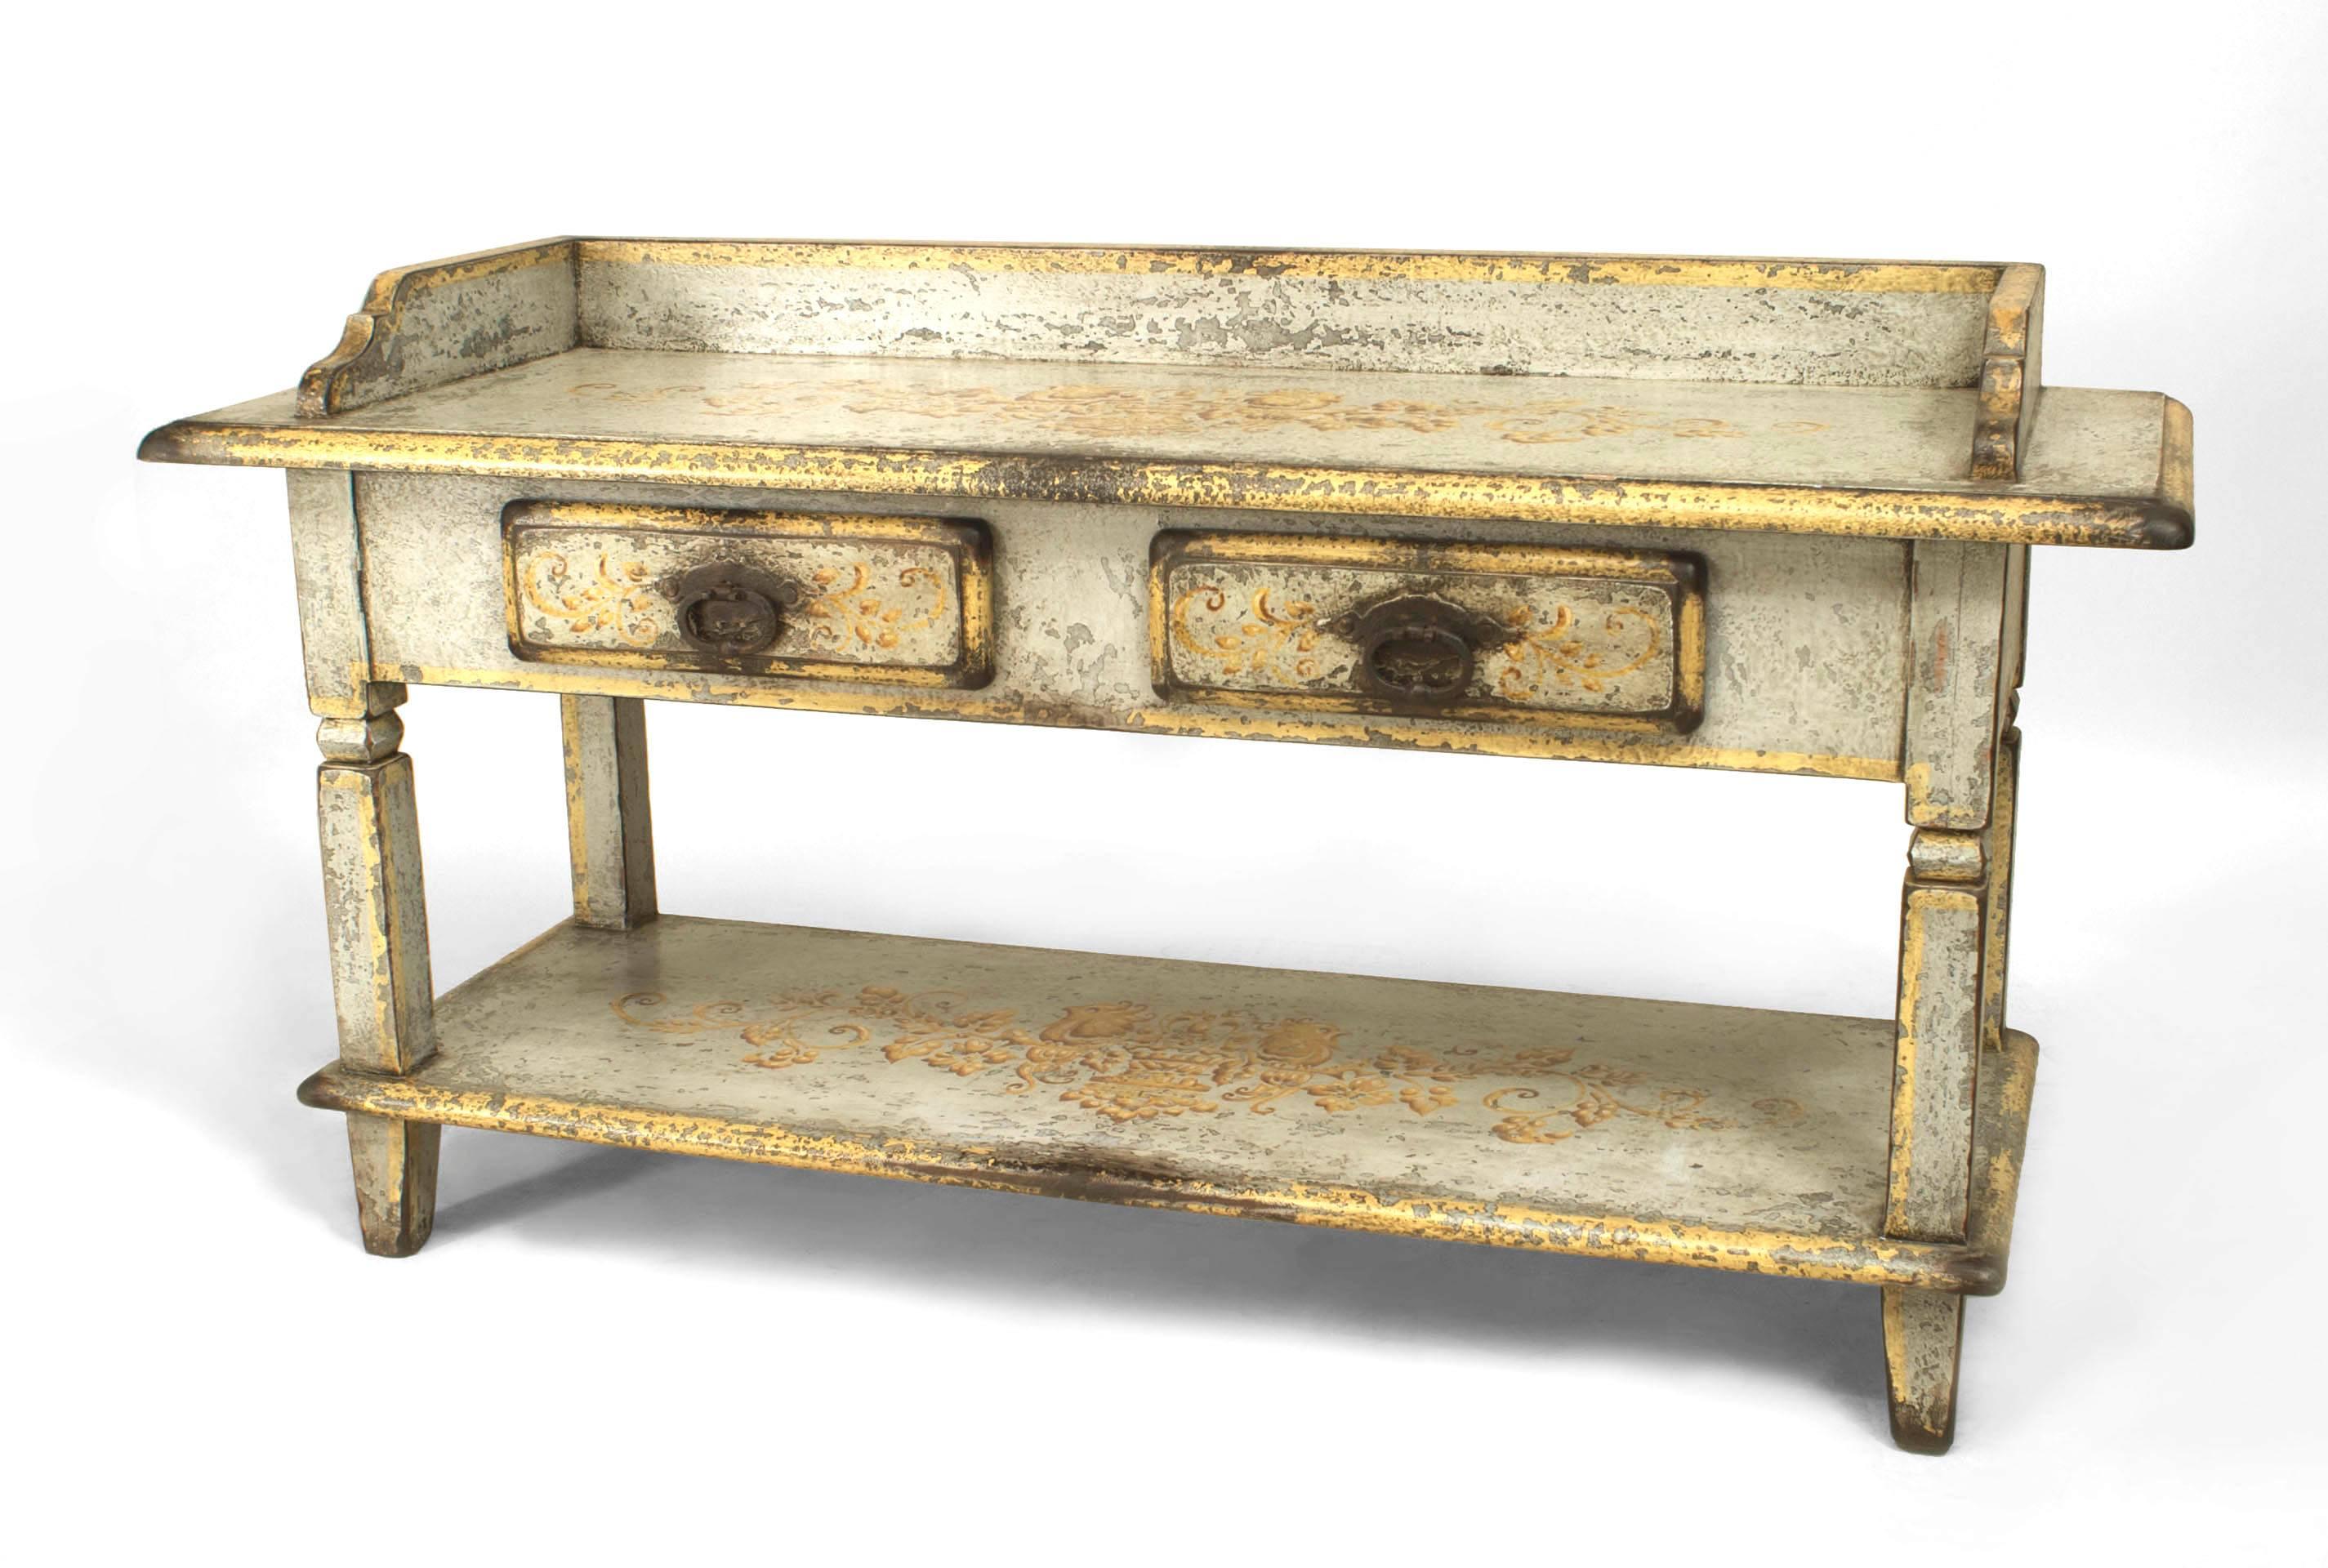 French Provincial (19th Century) grey painted serving/work table with gold decorated top and shelf with a back rail and 2 drawers.
